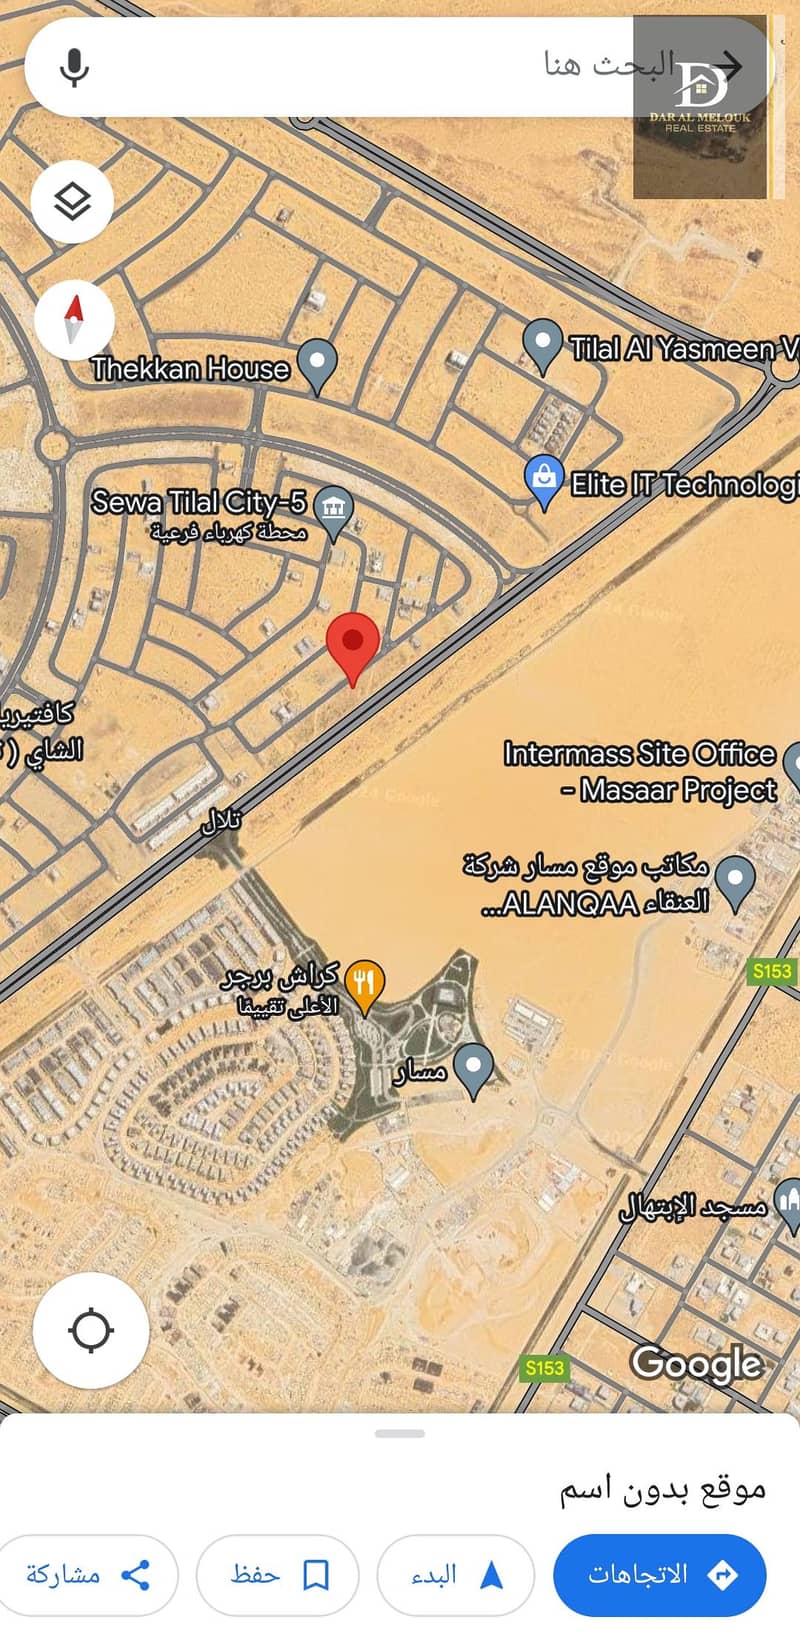 For sale in Sharjah, Tilal area, residential and investment land, area of ​​3,100 feet, excellent location, close to services, close to the Sharjah Mosque, close to the train station, and close to tourists. 670,000 dirhams are required. We are a real esta